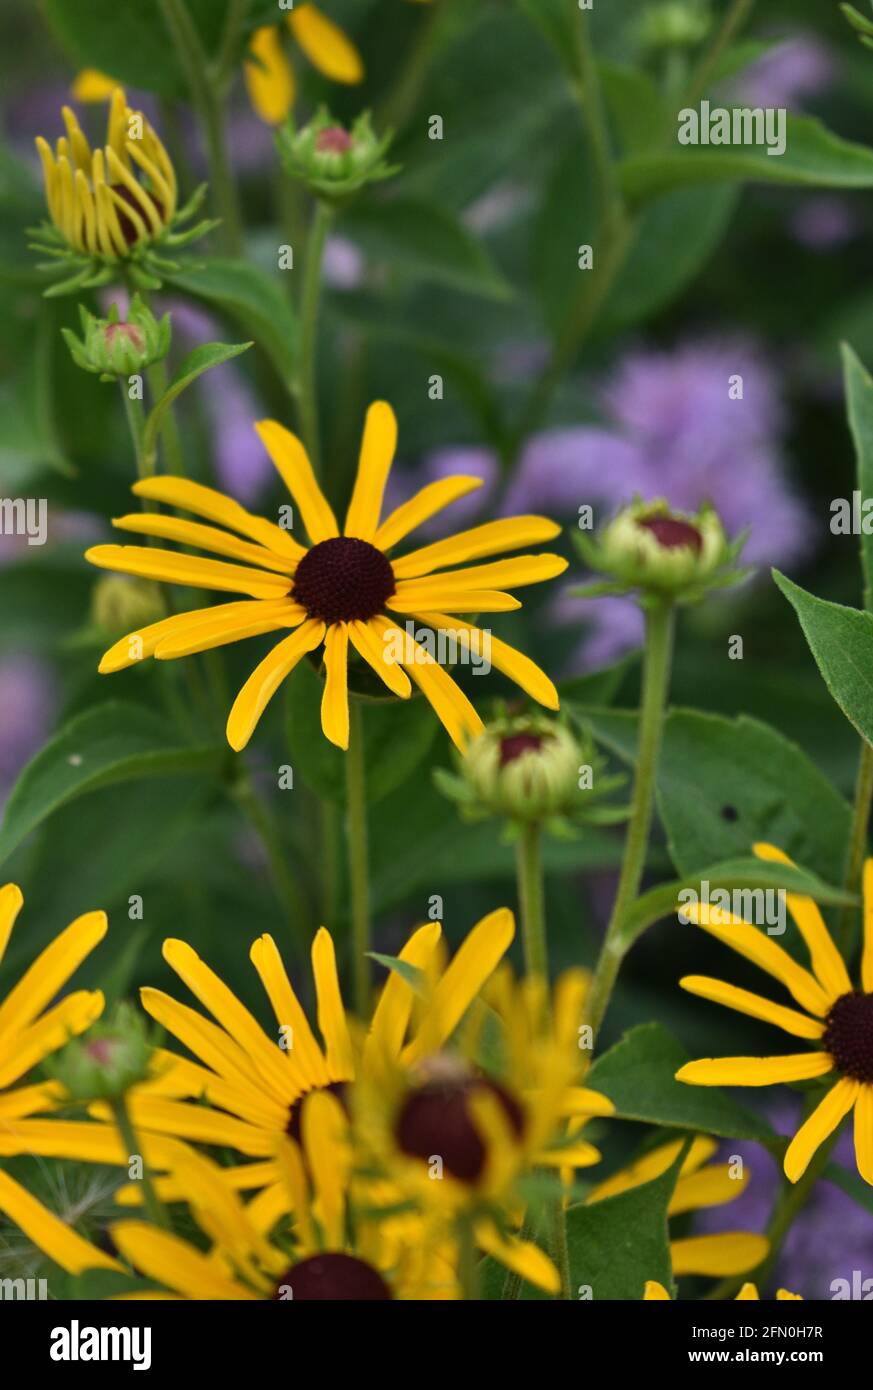 A grouping of yellow coneflowers in a prairie setting Stock Photo